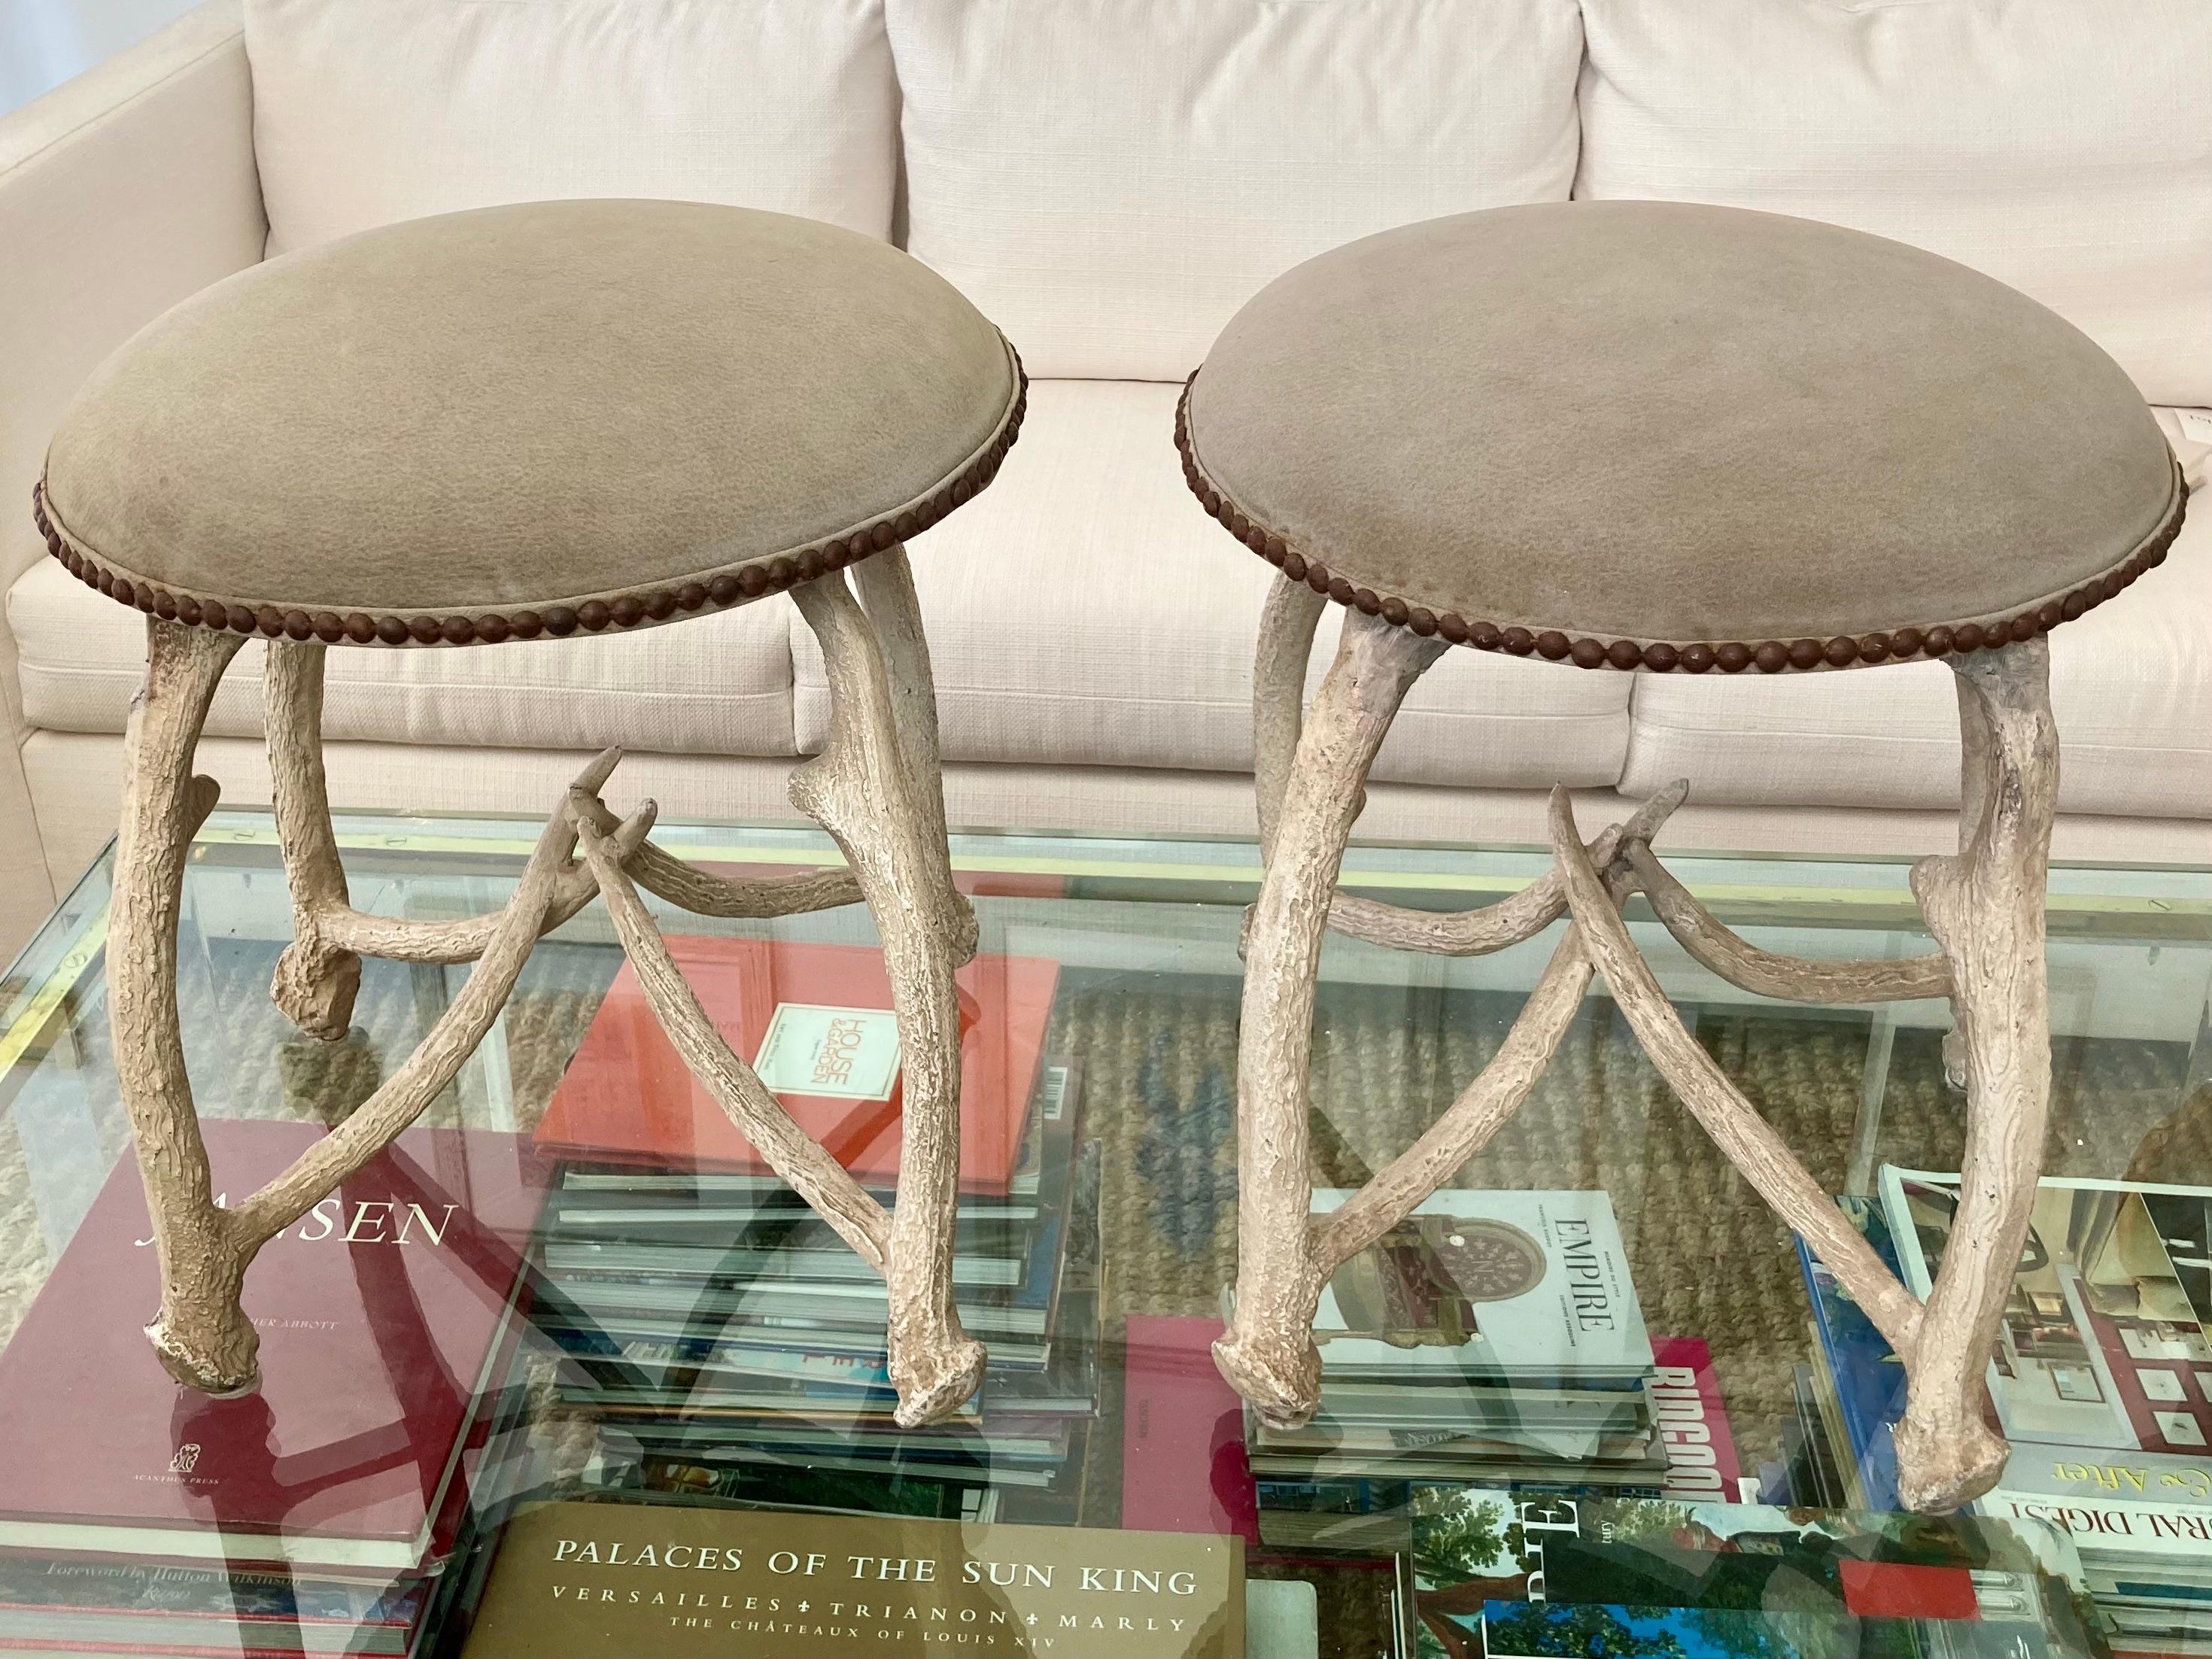 Beautiful pair of Arthur Court horn ottomans. These are cast aluminum with a hand painted off-white natural finish. Classic light gray suede upholstery. Vintage items with some wear, but adds the character.